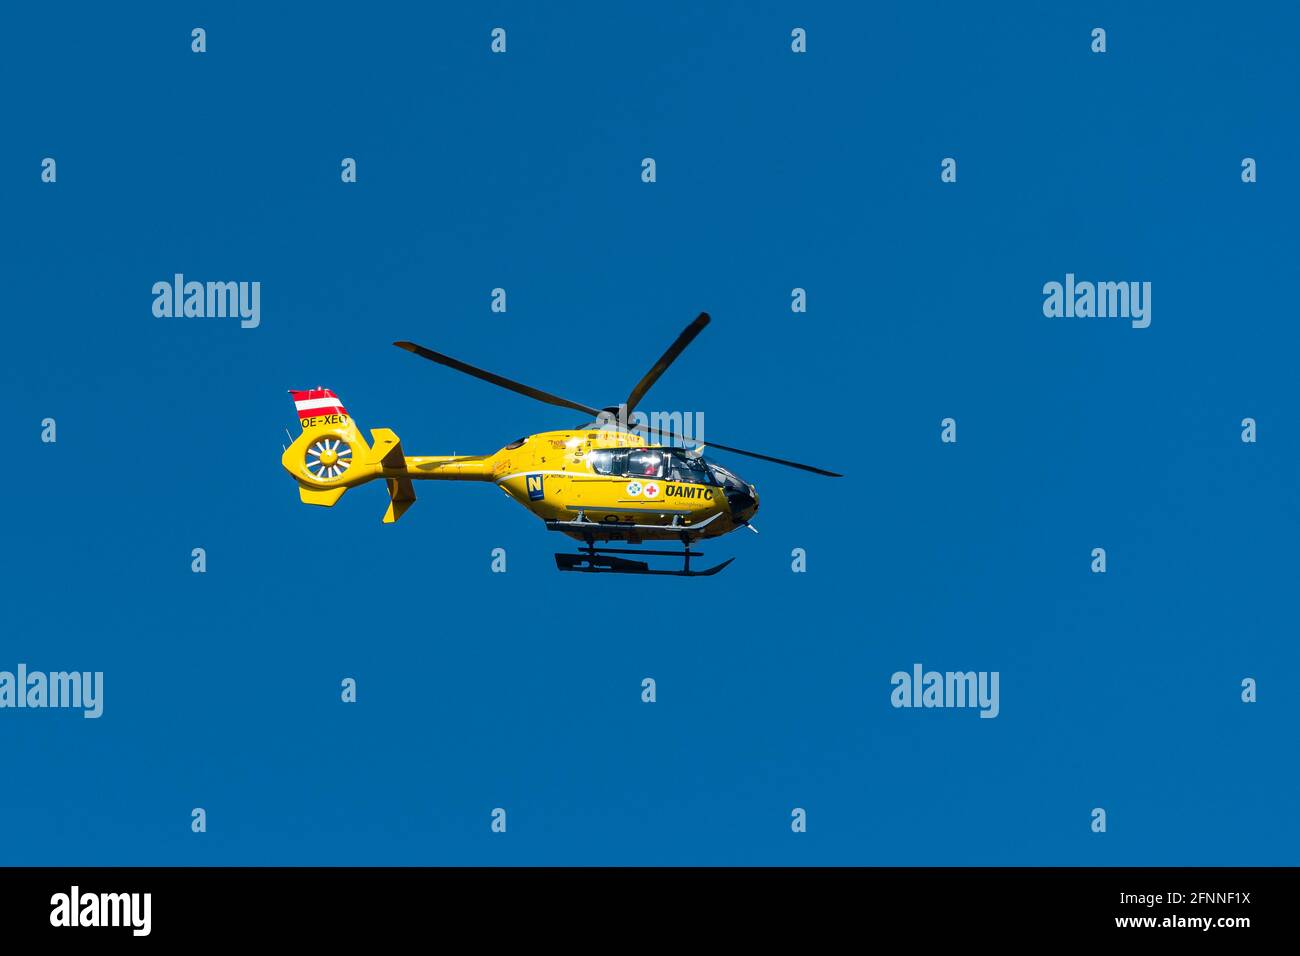 Vienna, Austria 31 March 2021: An Austrian ambulance helicopter flying, blue sky Stock Photo